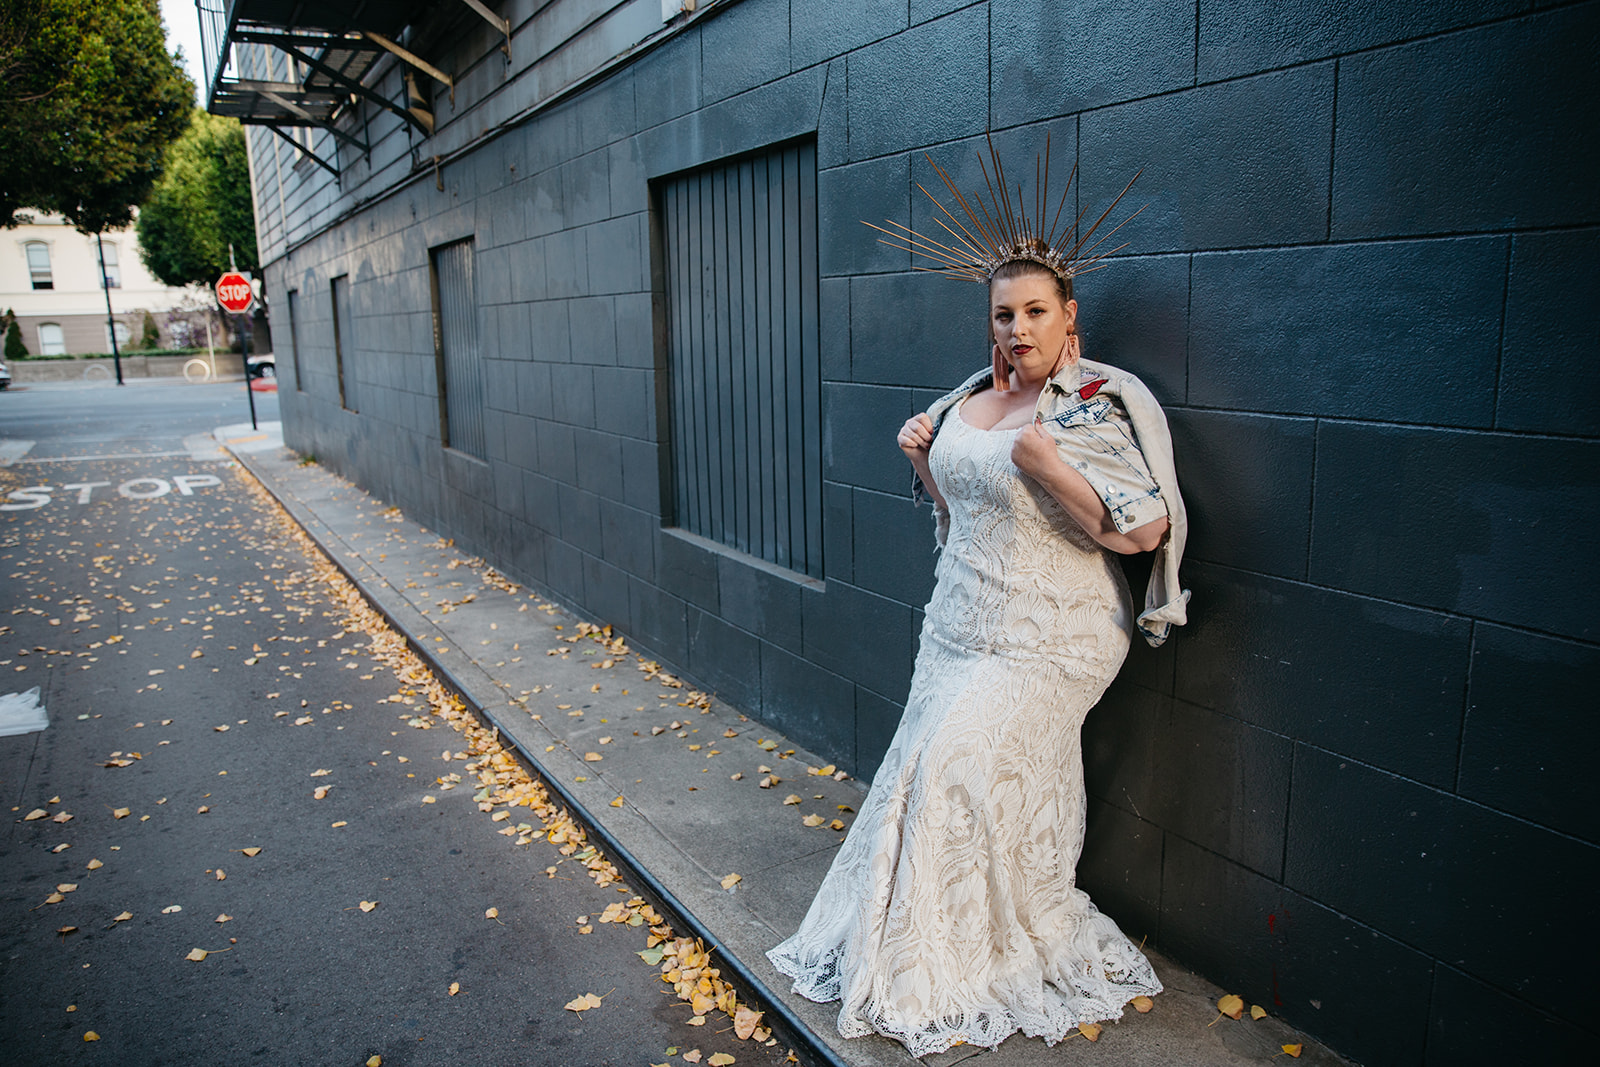 plus size model wearing an all over lace scoop neck wedding gown from the a practical wedding plus size wedding dress collection